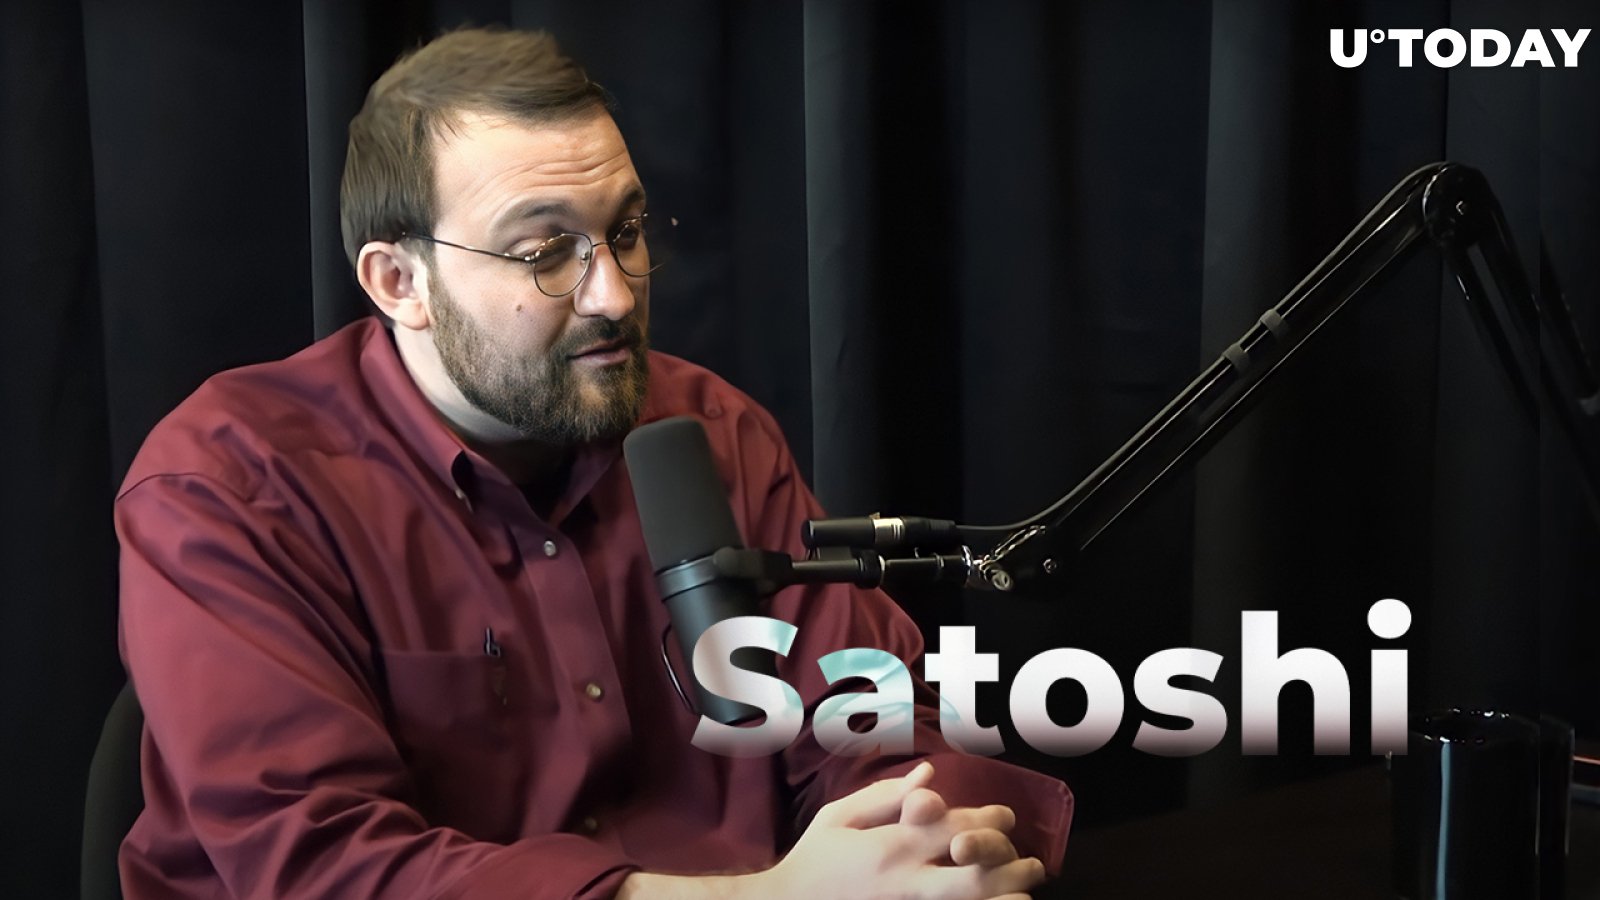 Charles Hoskinson Responds to Question About His “Claiming to Be Satoshi”, Here's What He Says